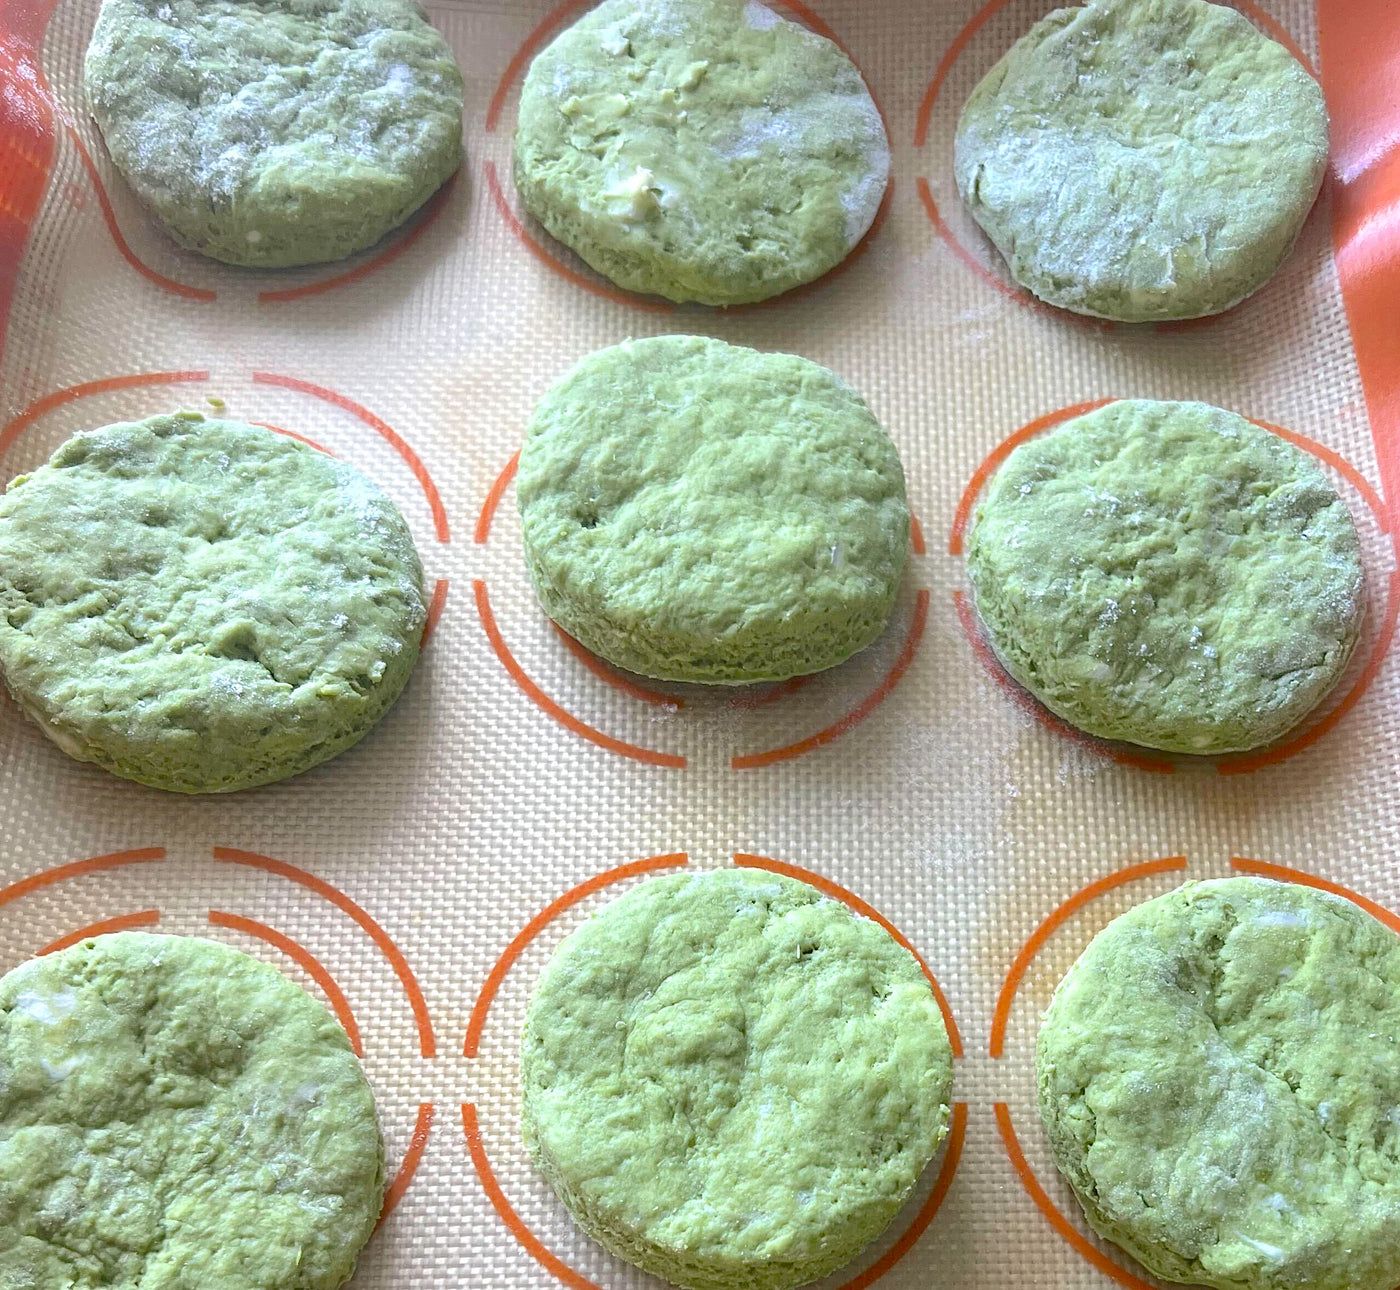 This easy and quick matcha biscuit recipe is the quintessential butter biscuit + the delicious earthy taste and extra boost of healthy goodness matcha is known for. 